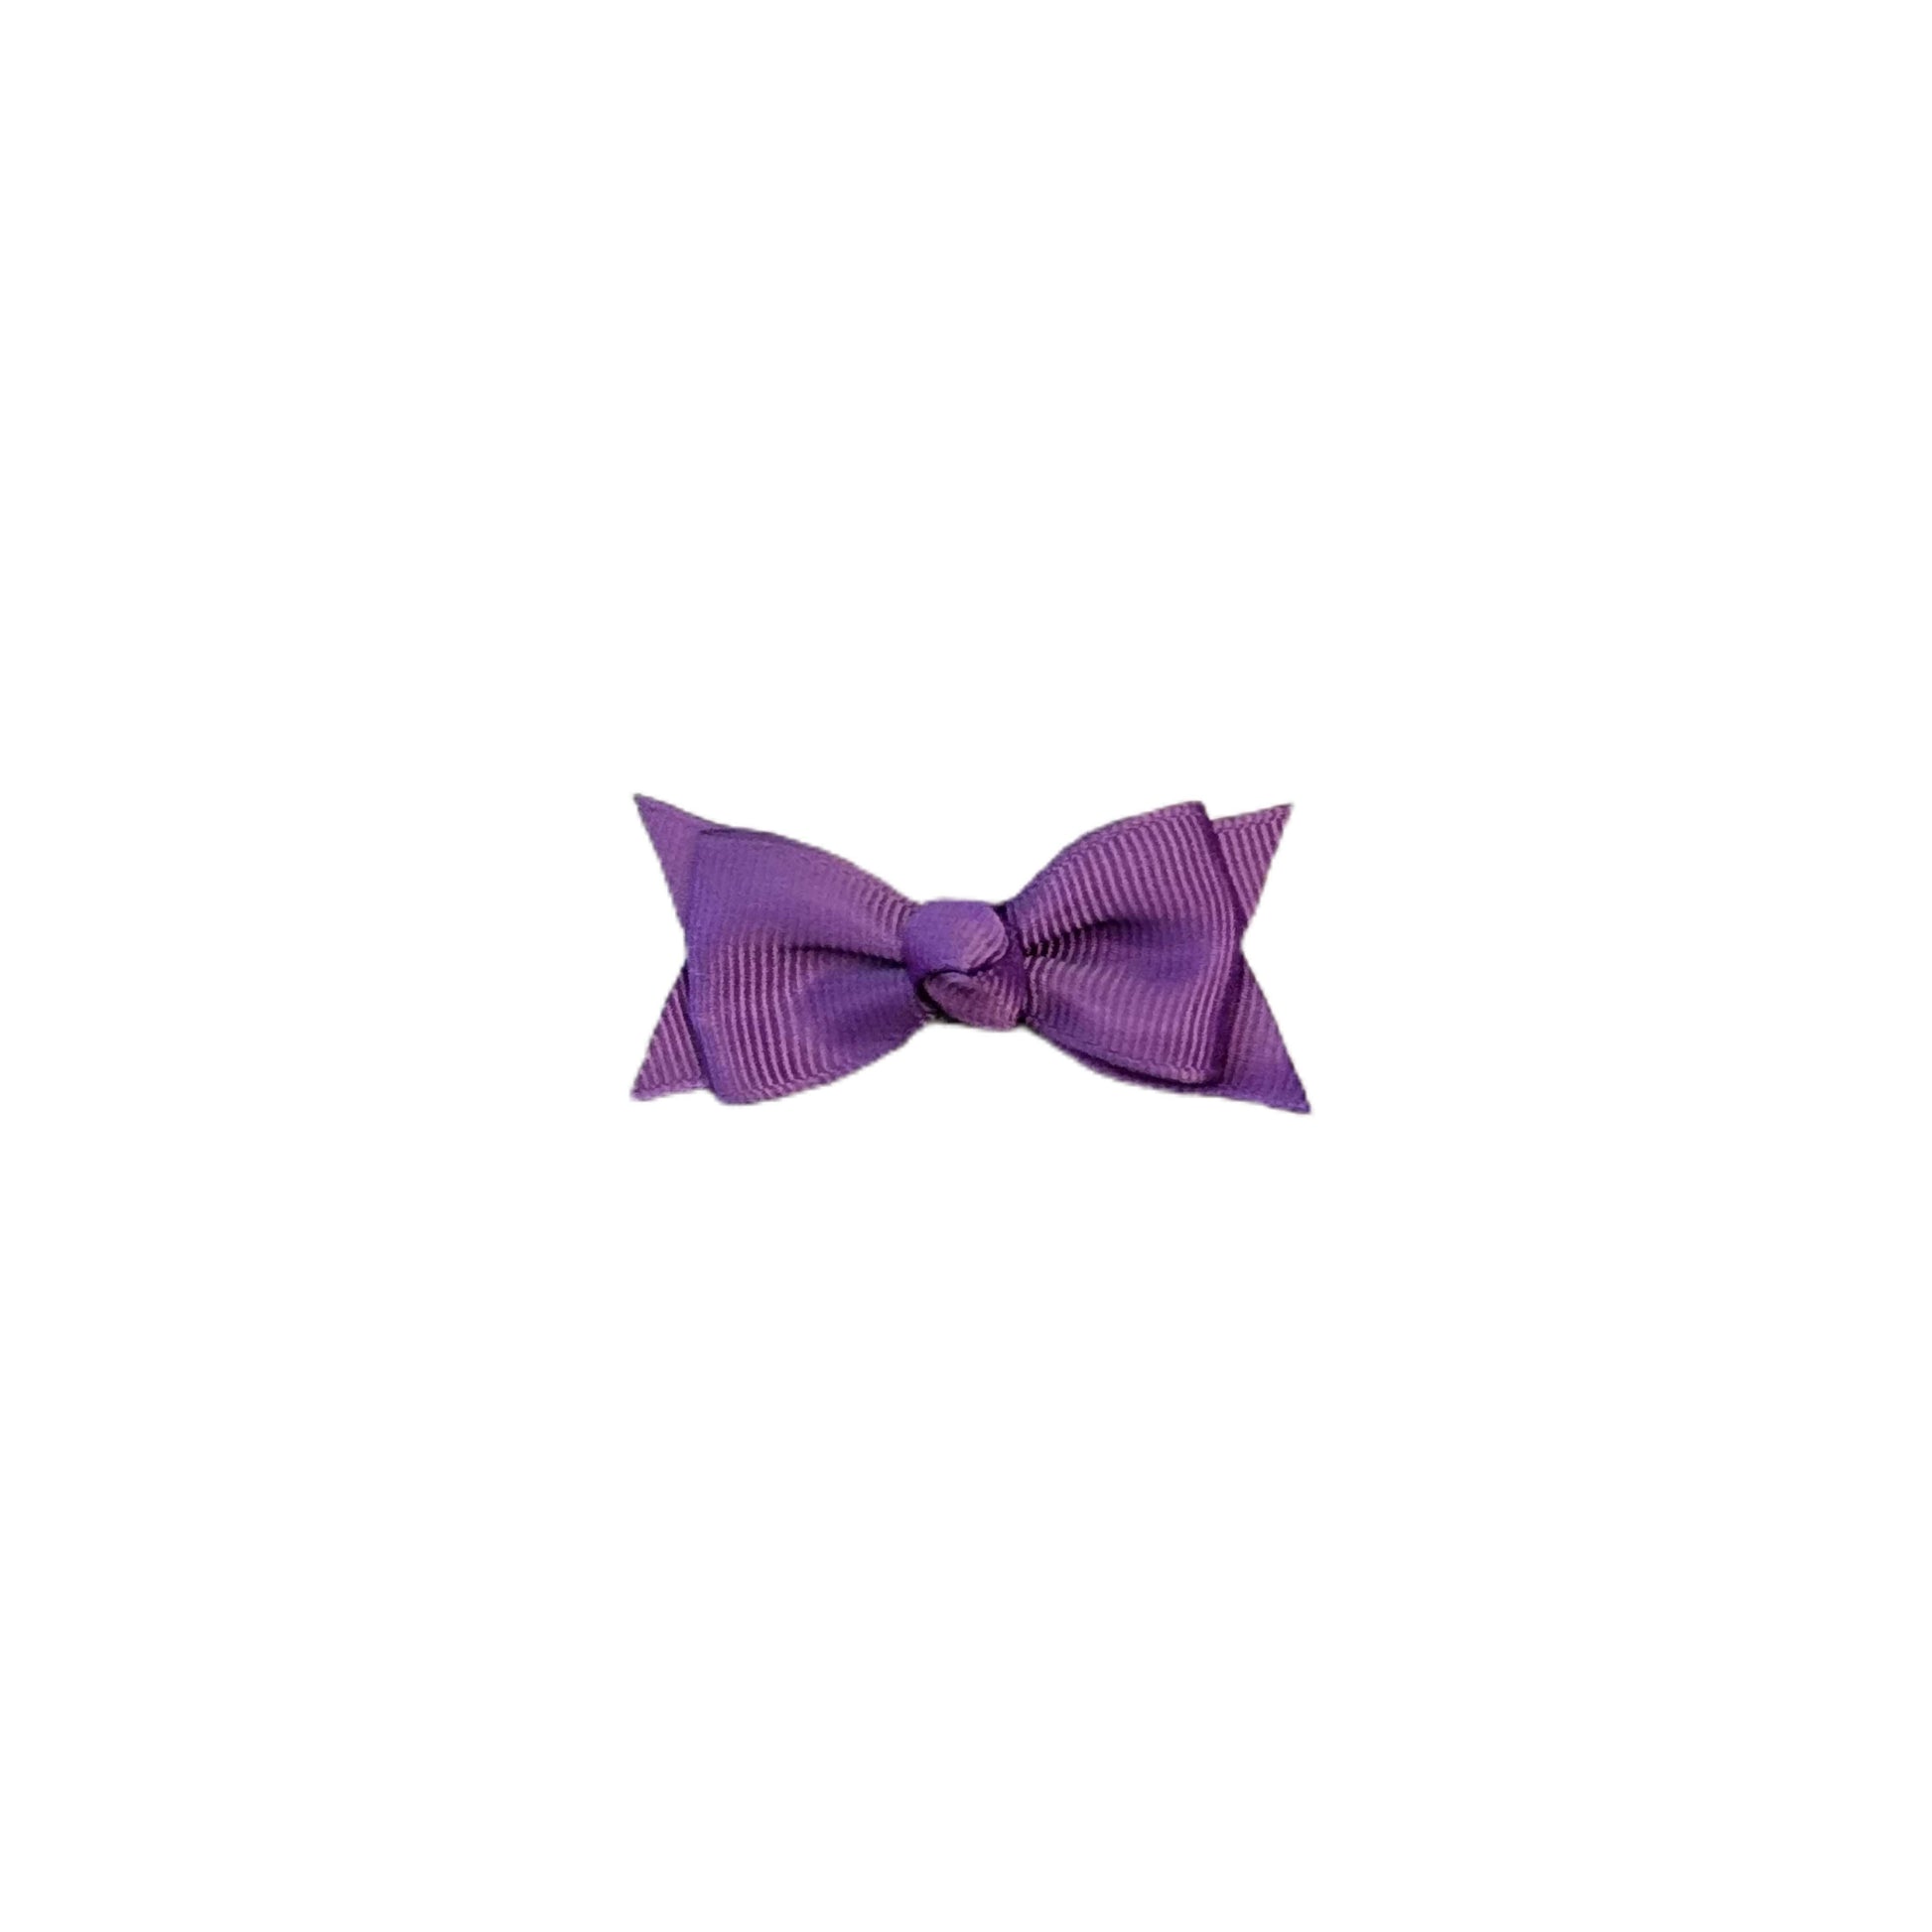 Itty Bitty Knotted Ribbon Bow 2.5"